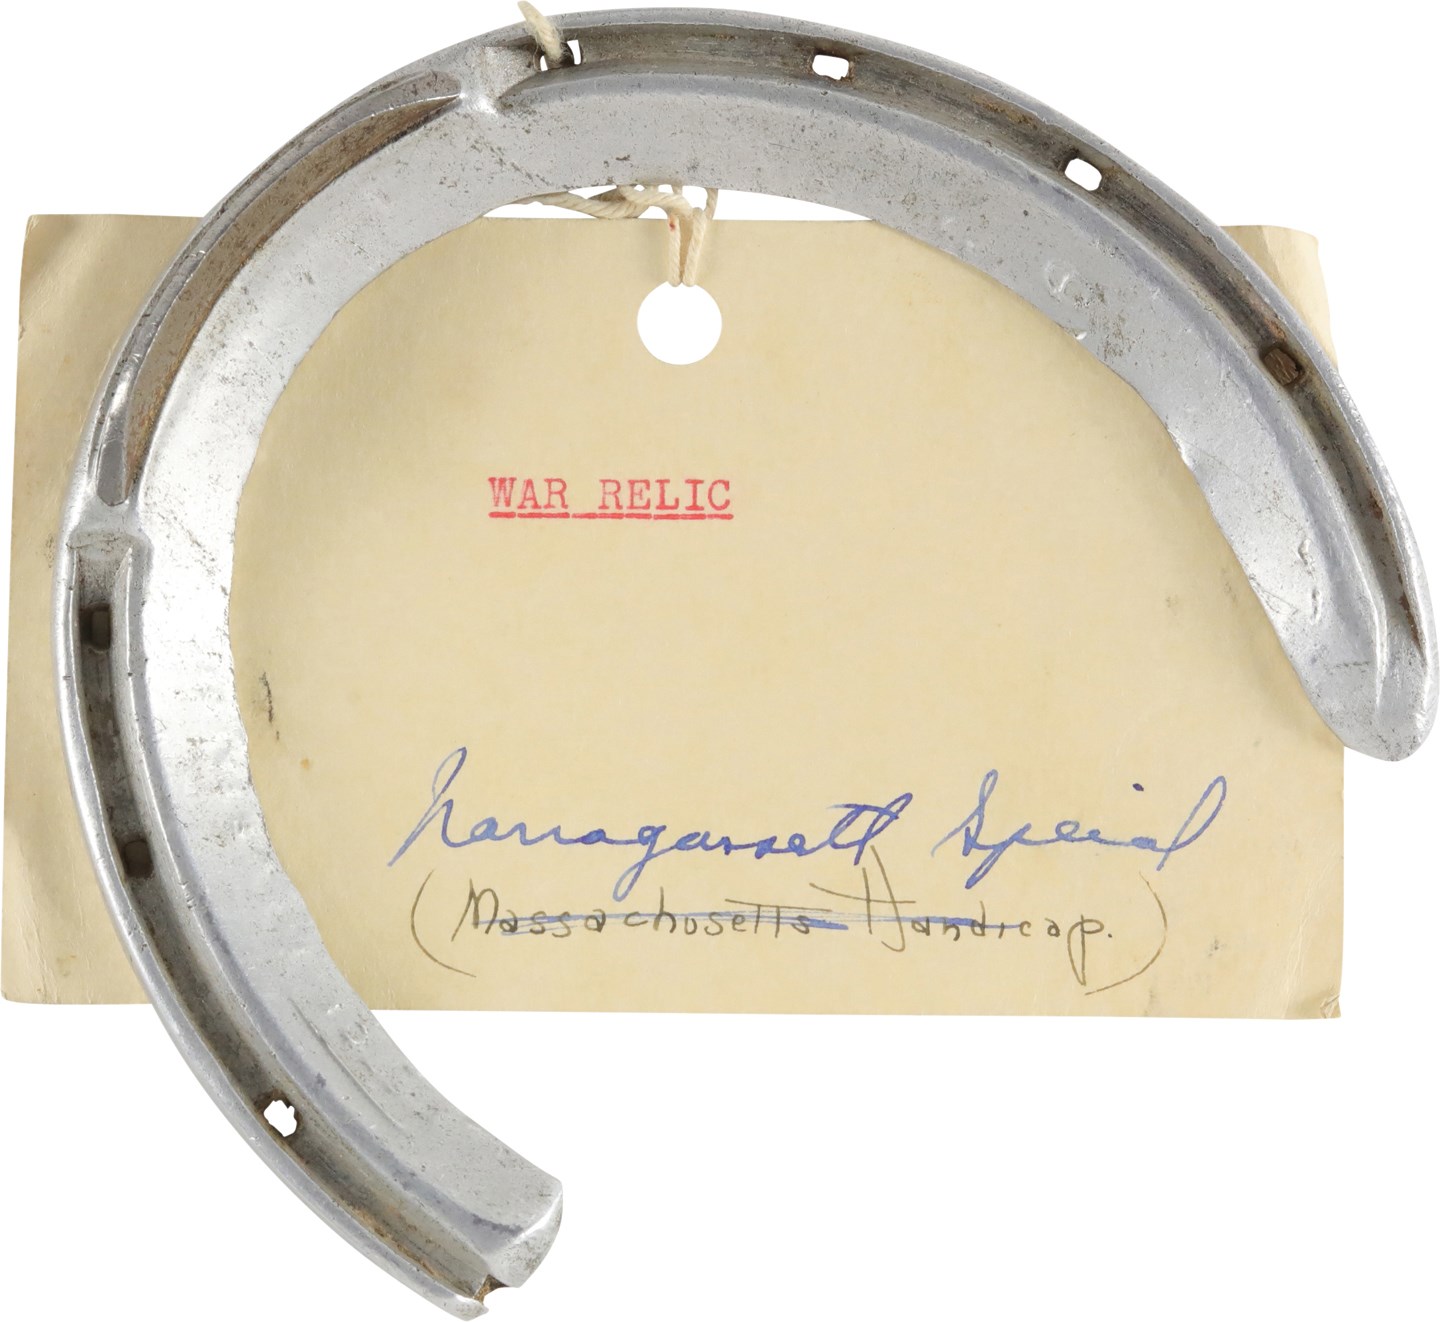 Horse Racing - 1941 "War Relic" Horseshoe Attributed to Narragansett Special Victory